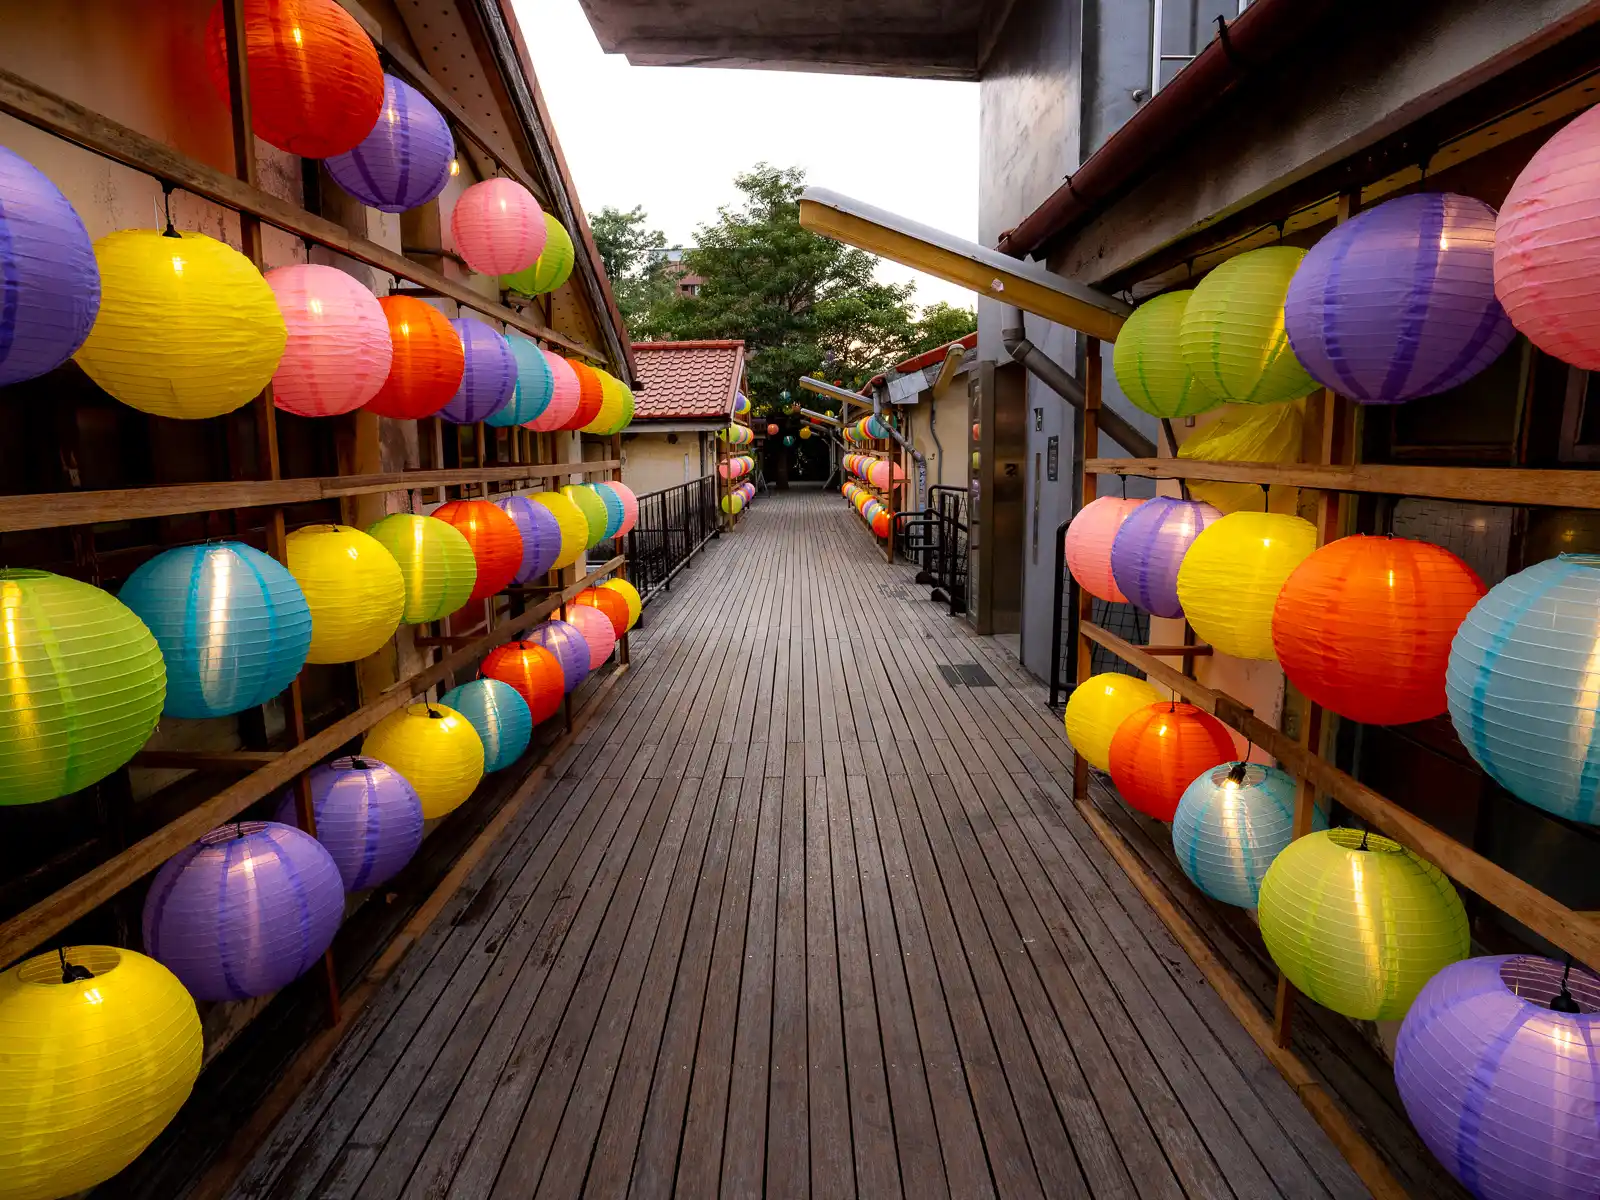 The elevated walkways connecting the buildings of Shenji New Village are decorated with colorful paper lanterns.